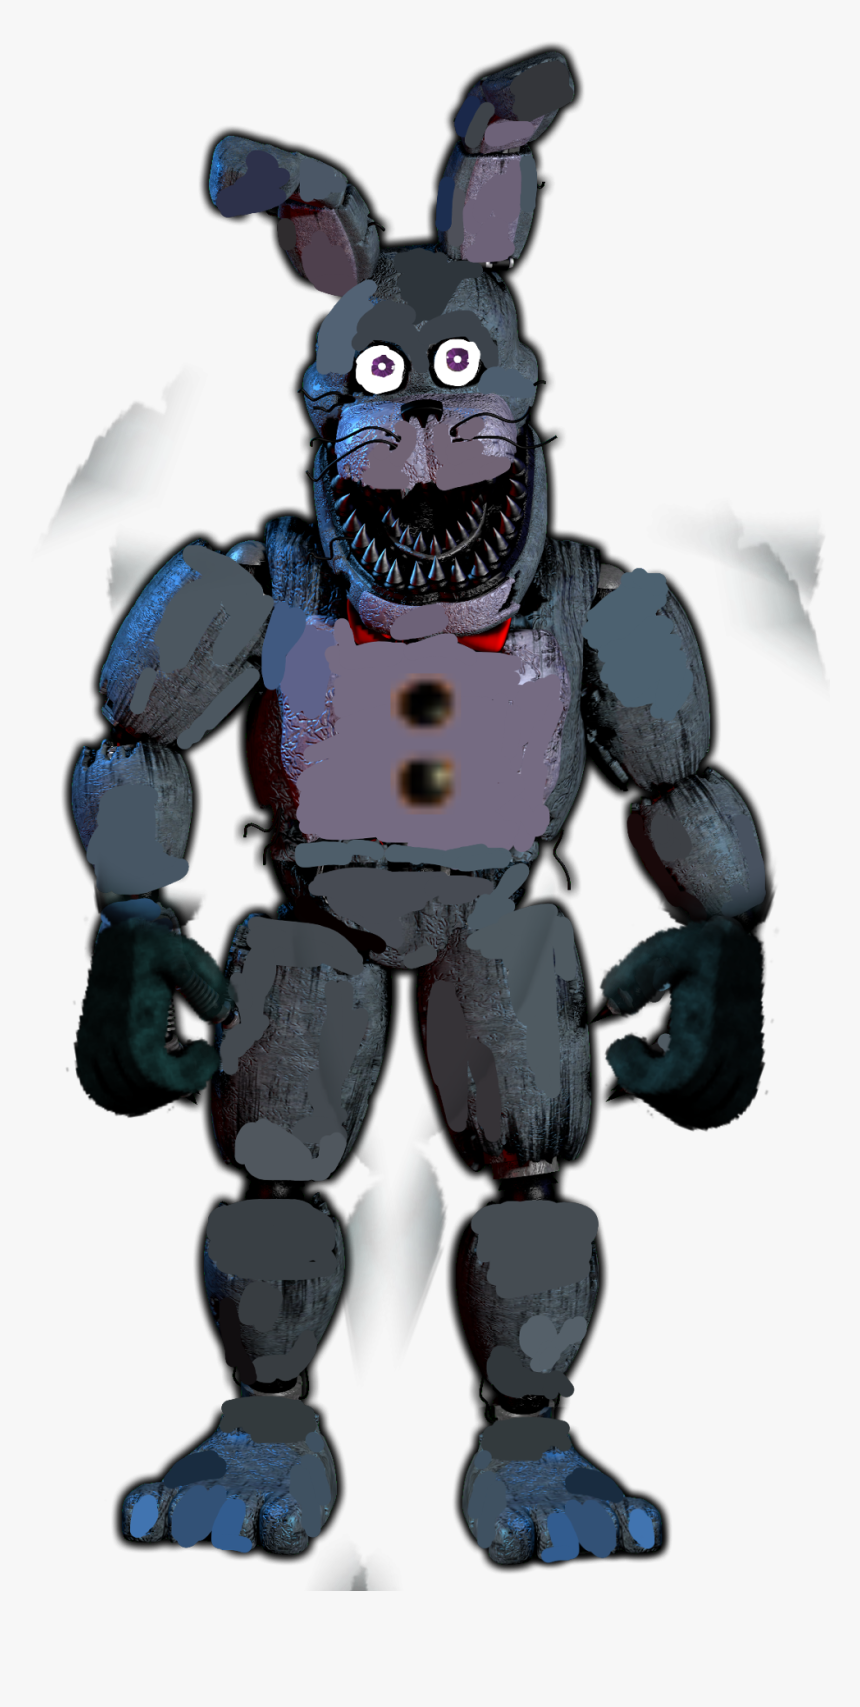 Fixed Nightmare Bonnie For @jaxivany - Fnaf 4 Fixed Bonnie, HD Png Download, Free Download